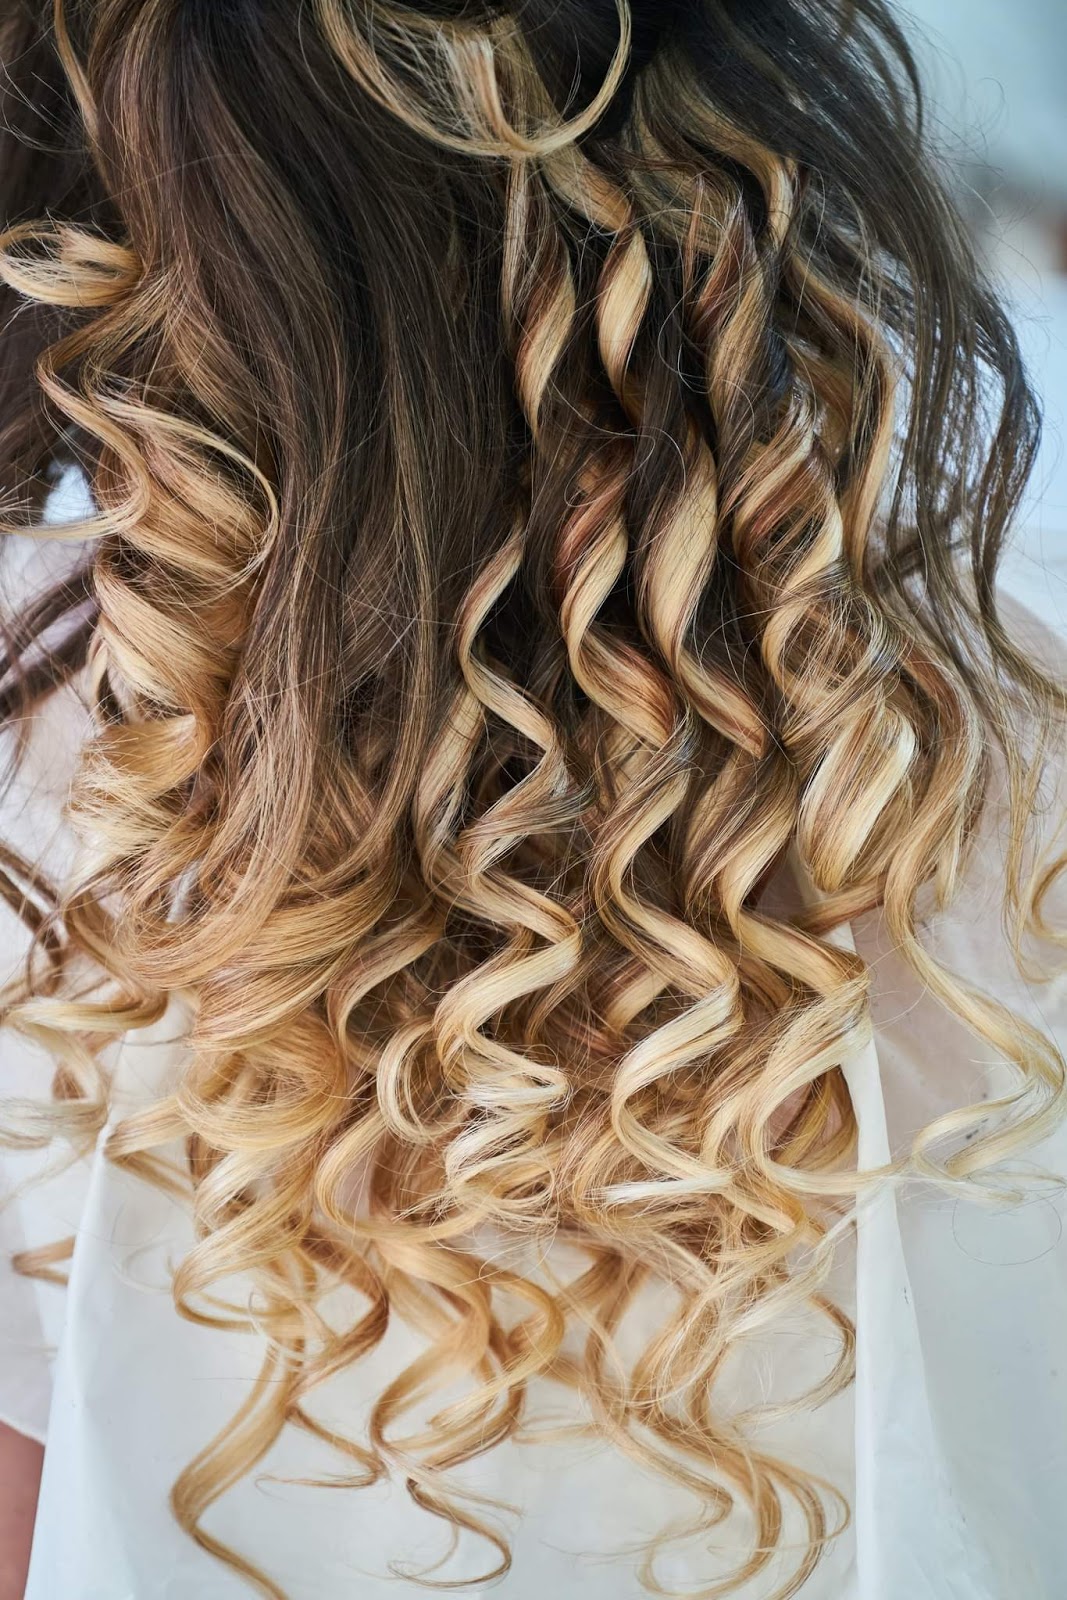 Hairstyles for curly hair